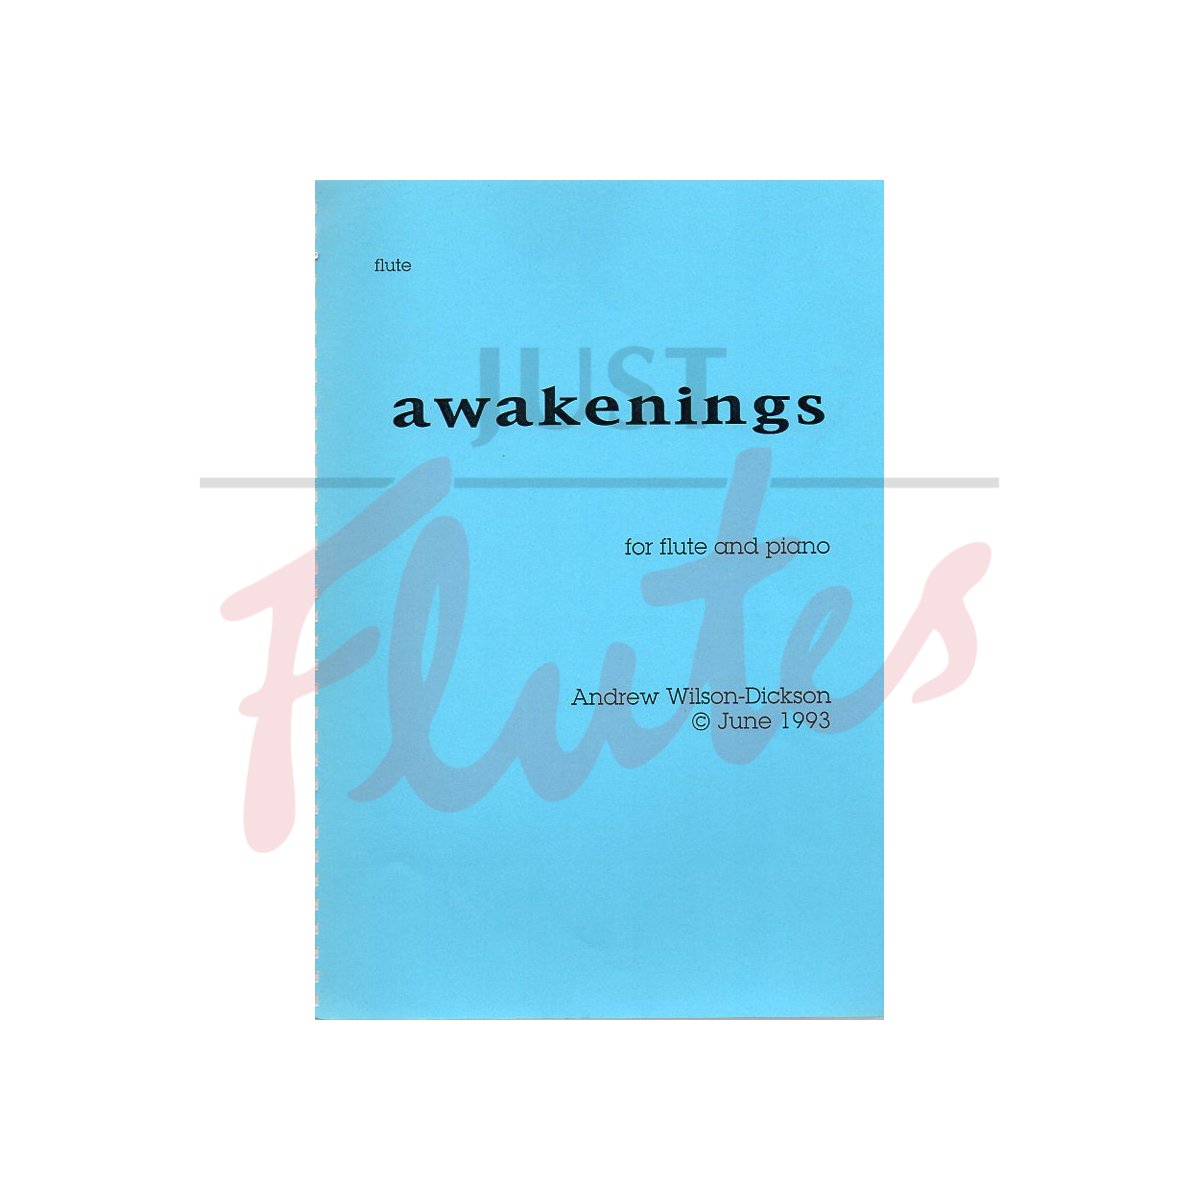 Awakenings for Flute and Piano